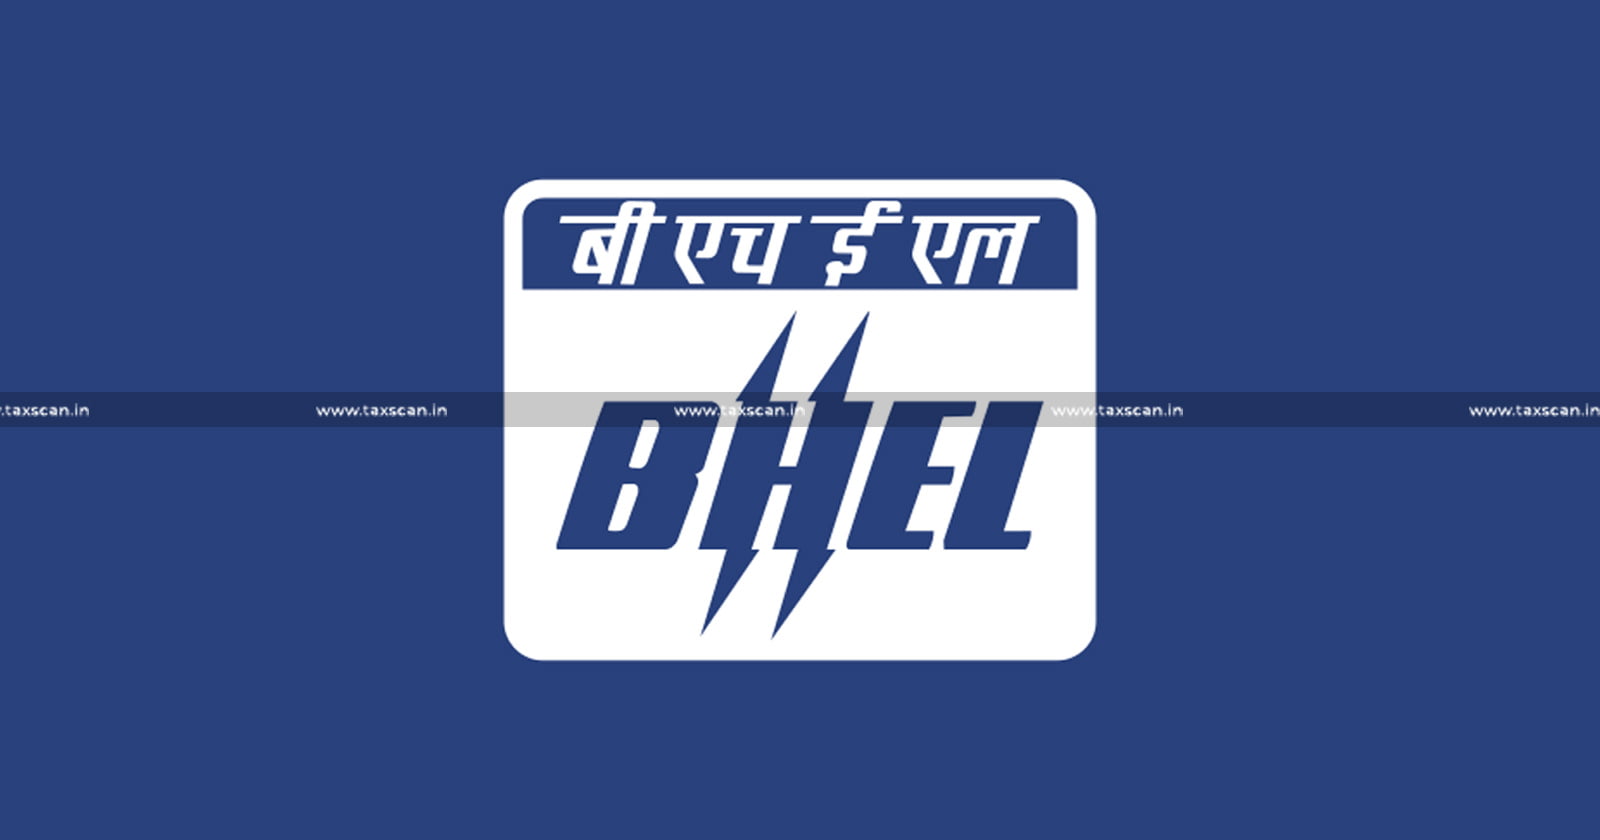 BHEL - Settlement with GE Power - GE Power - NCLT - Insolvency petition - taxscan